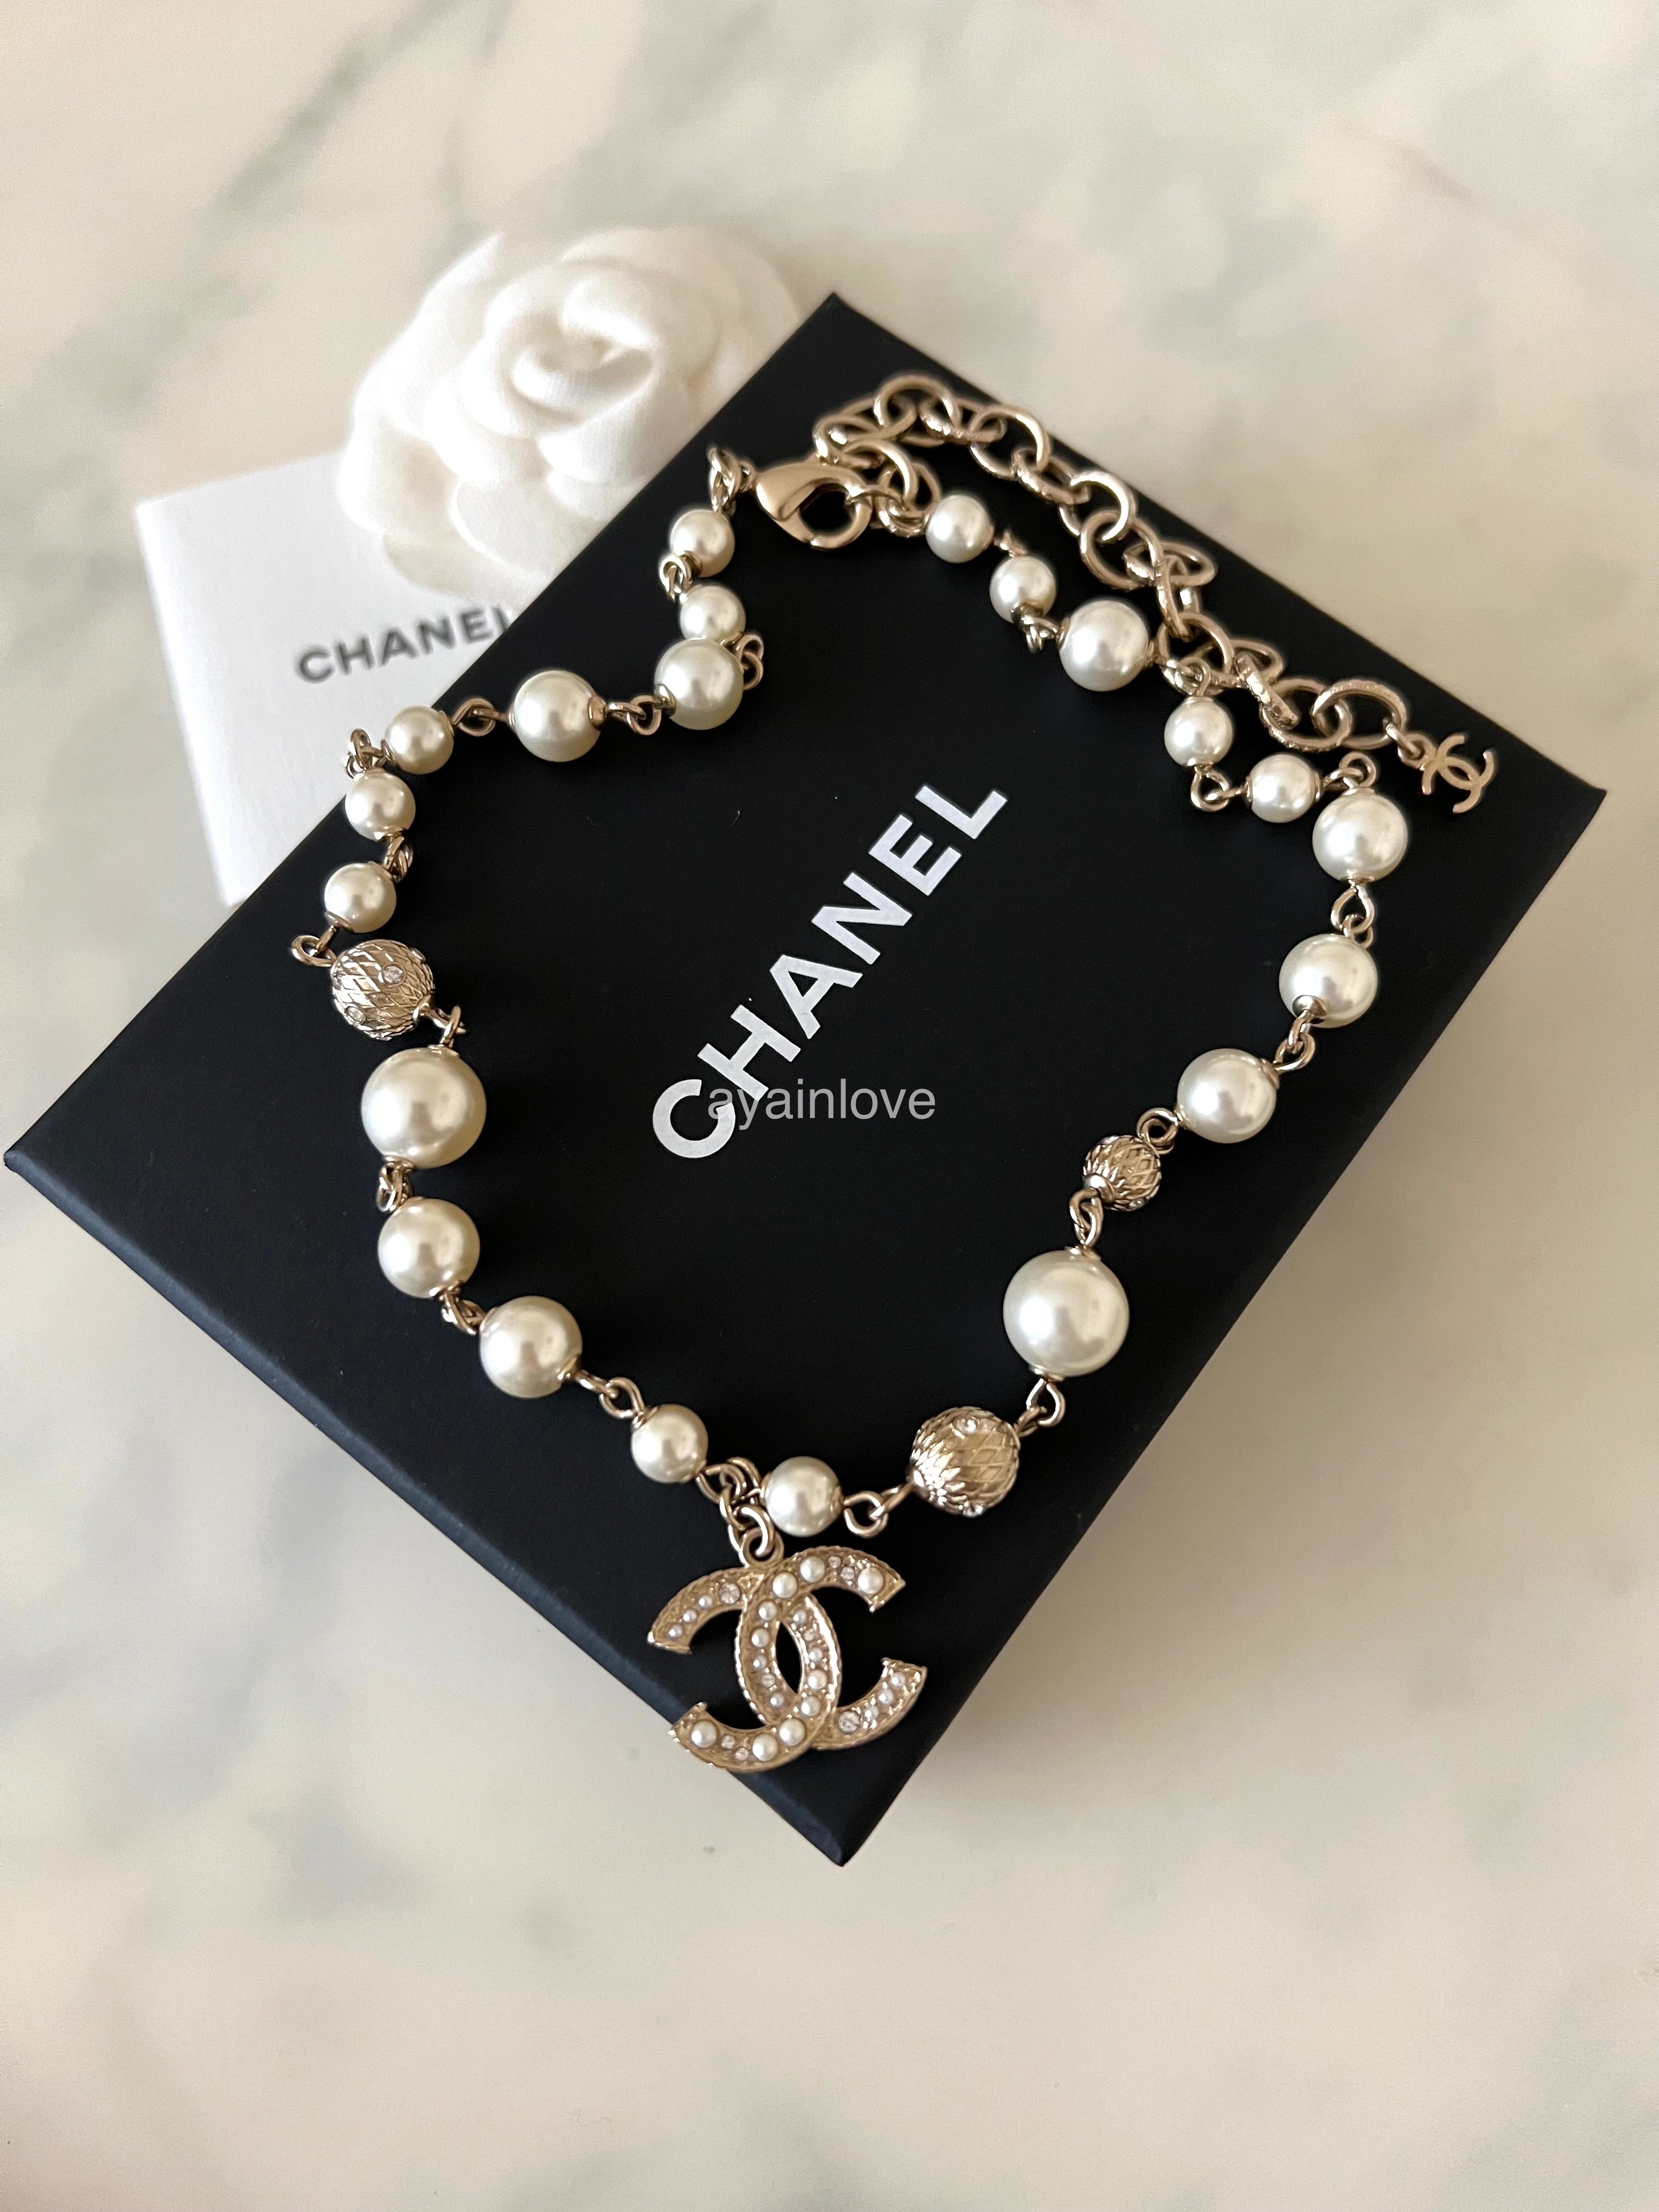 Vintage Authentic Chanel Faux Baroque Pearl & Crystal Choker Necklace - Etsy